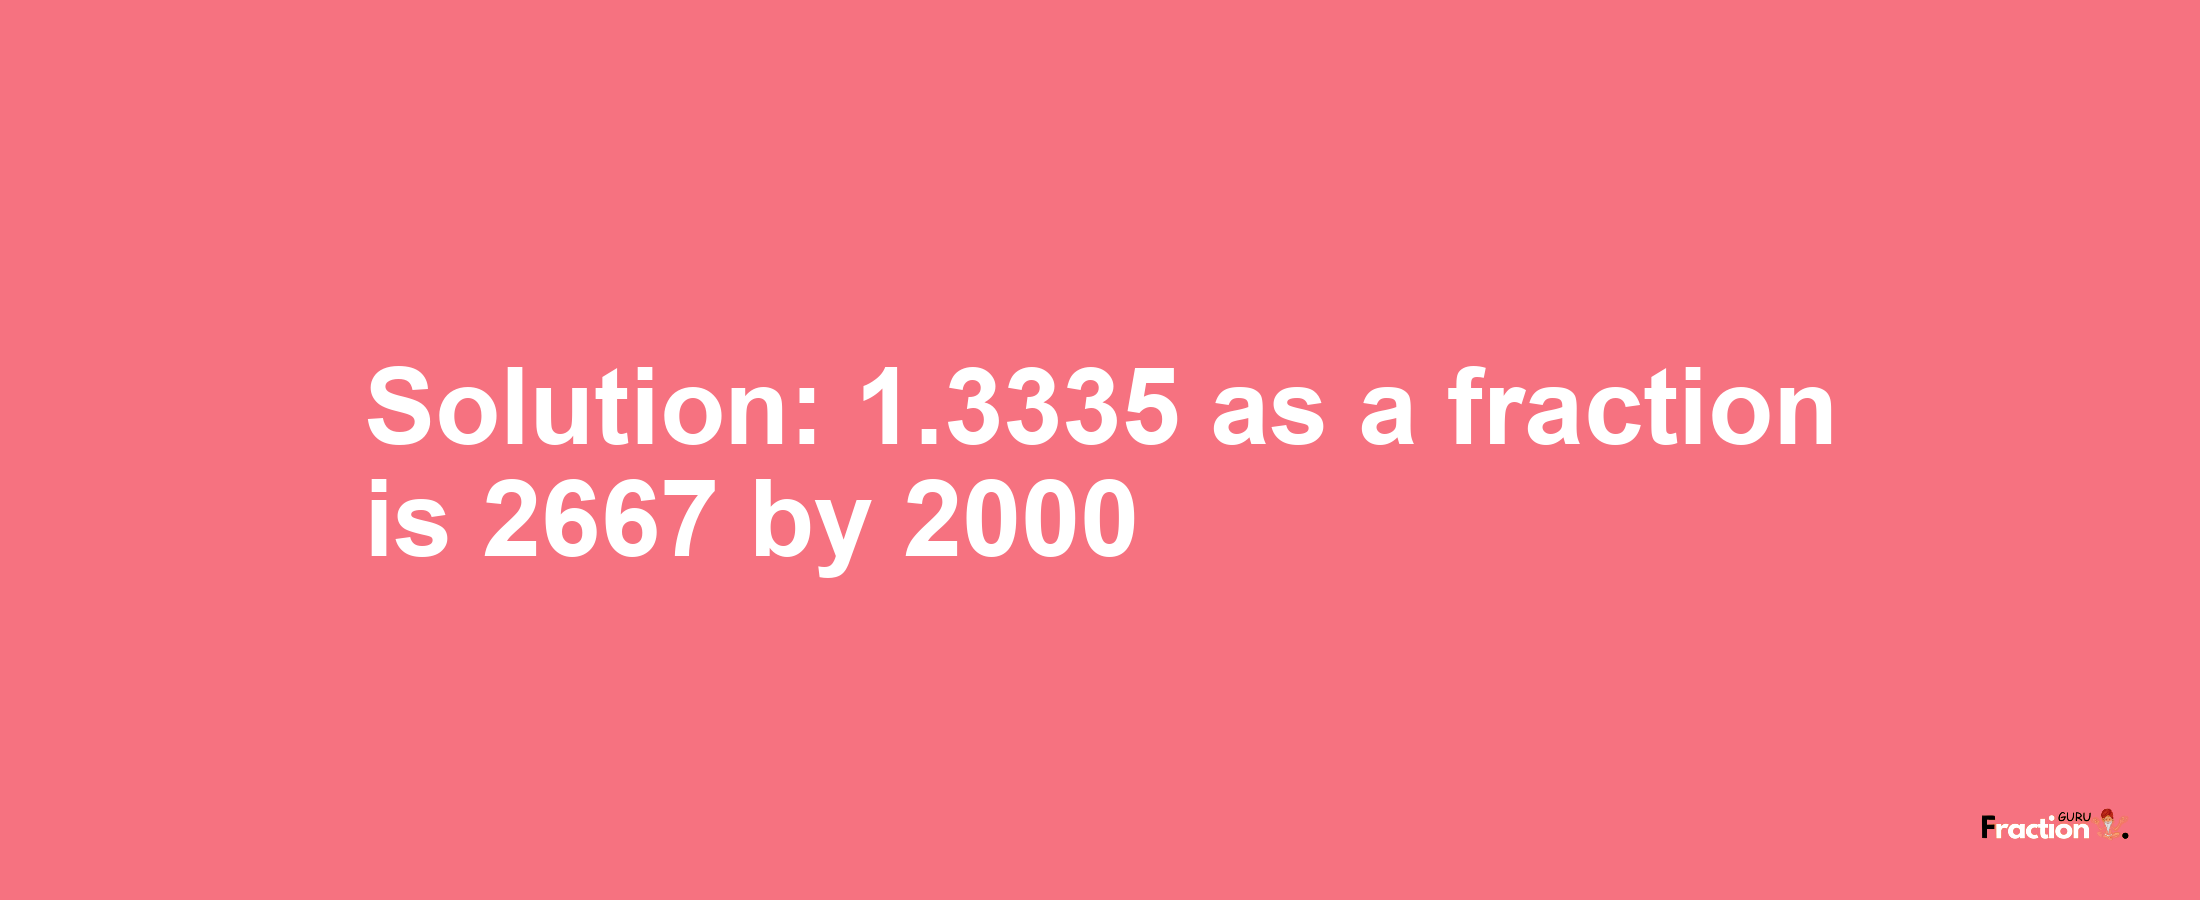 Solution:1.3335 as a fraction is 2667/2000